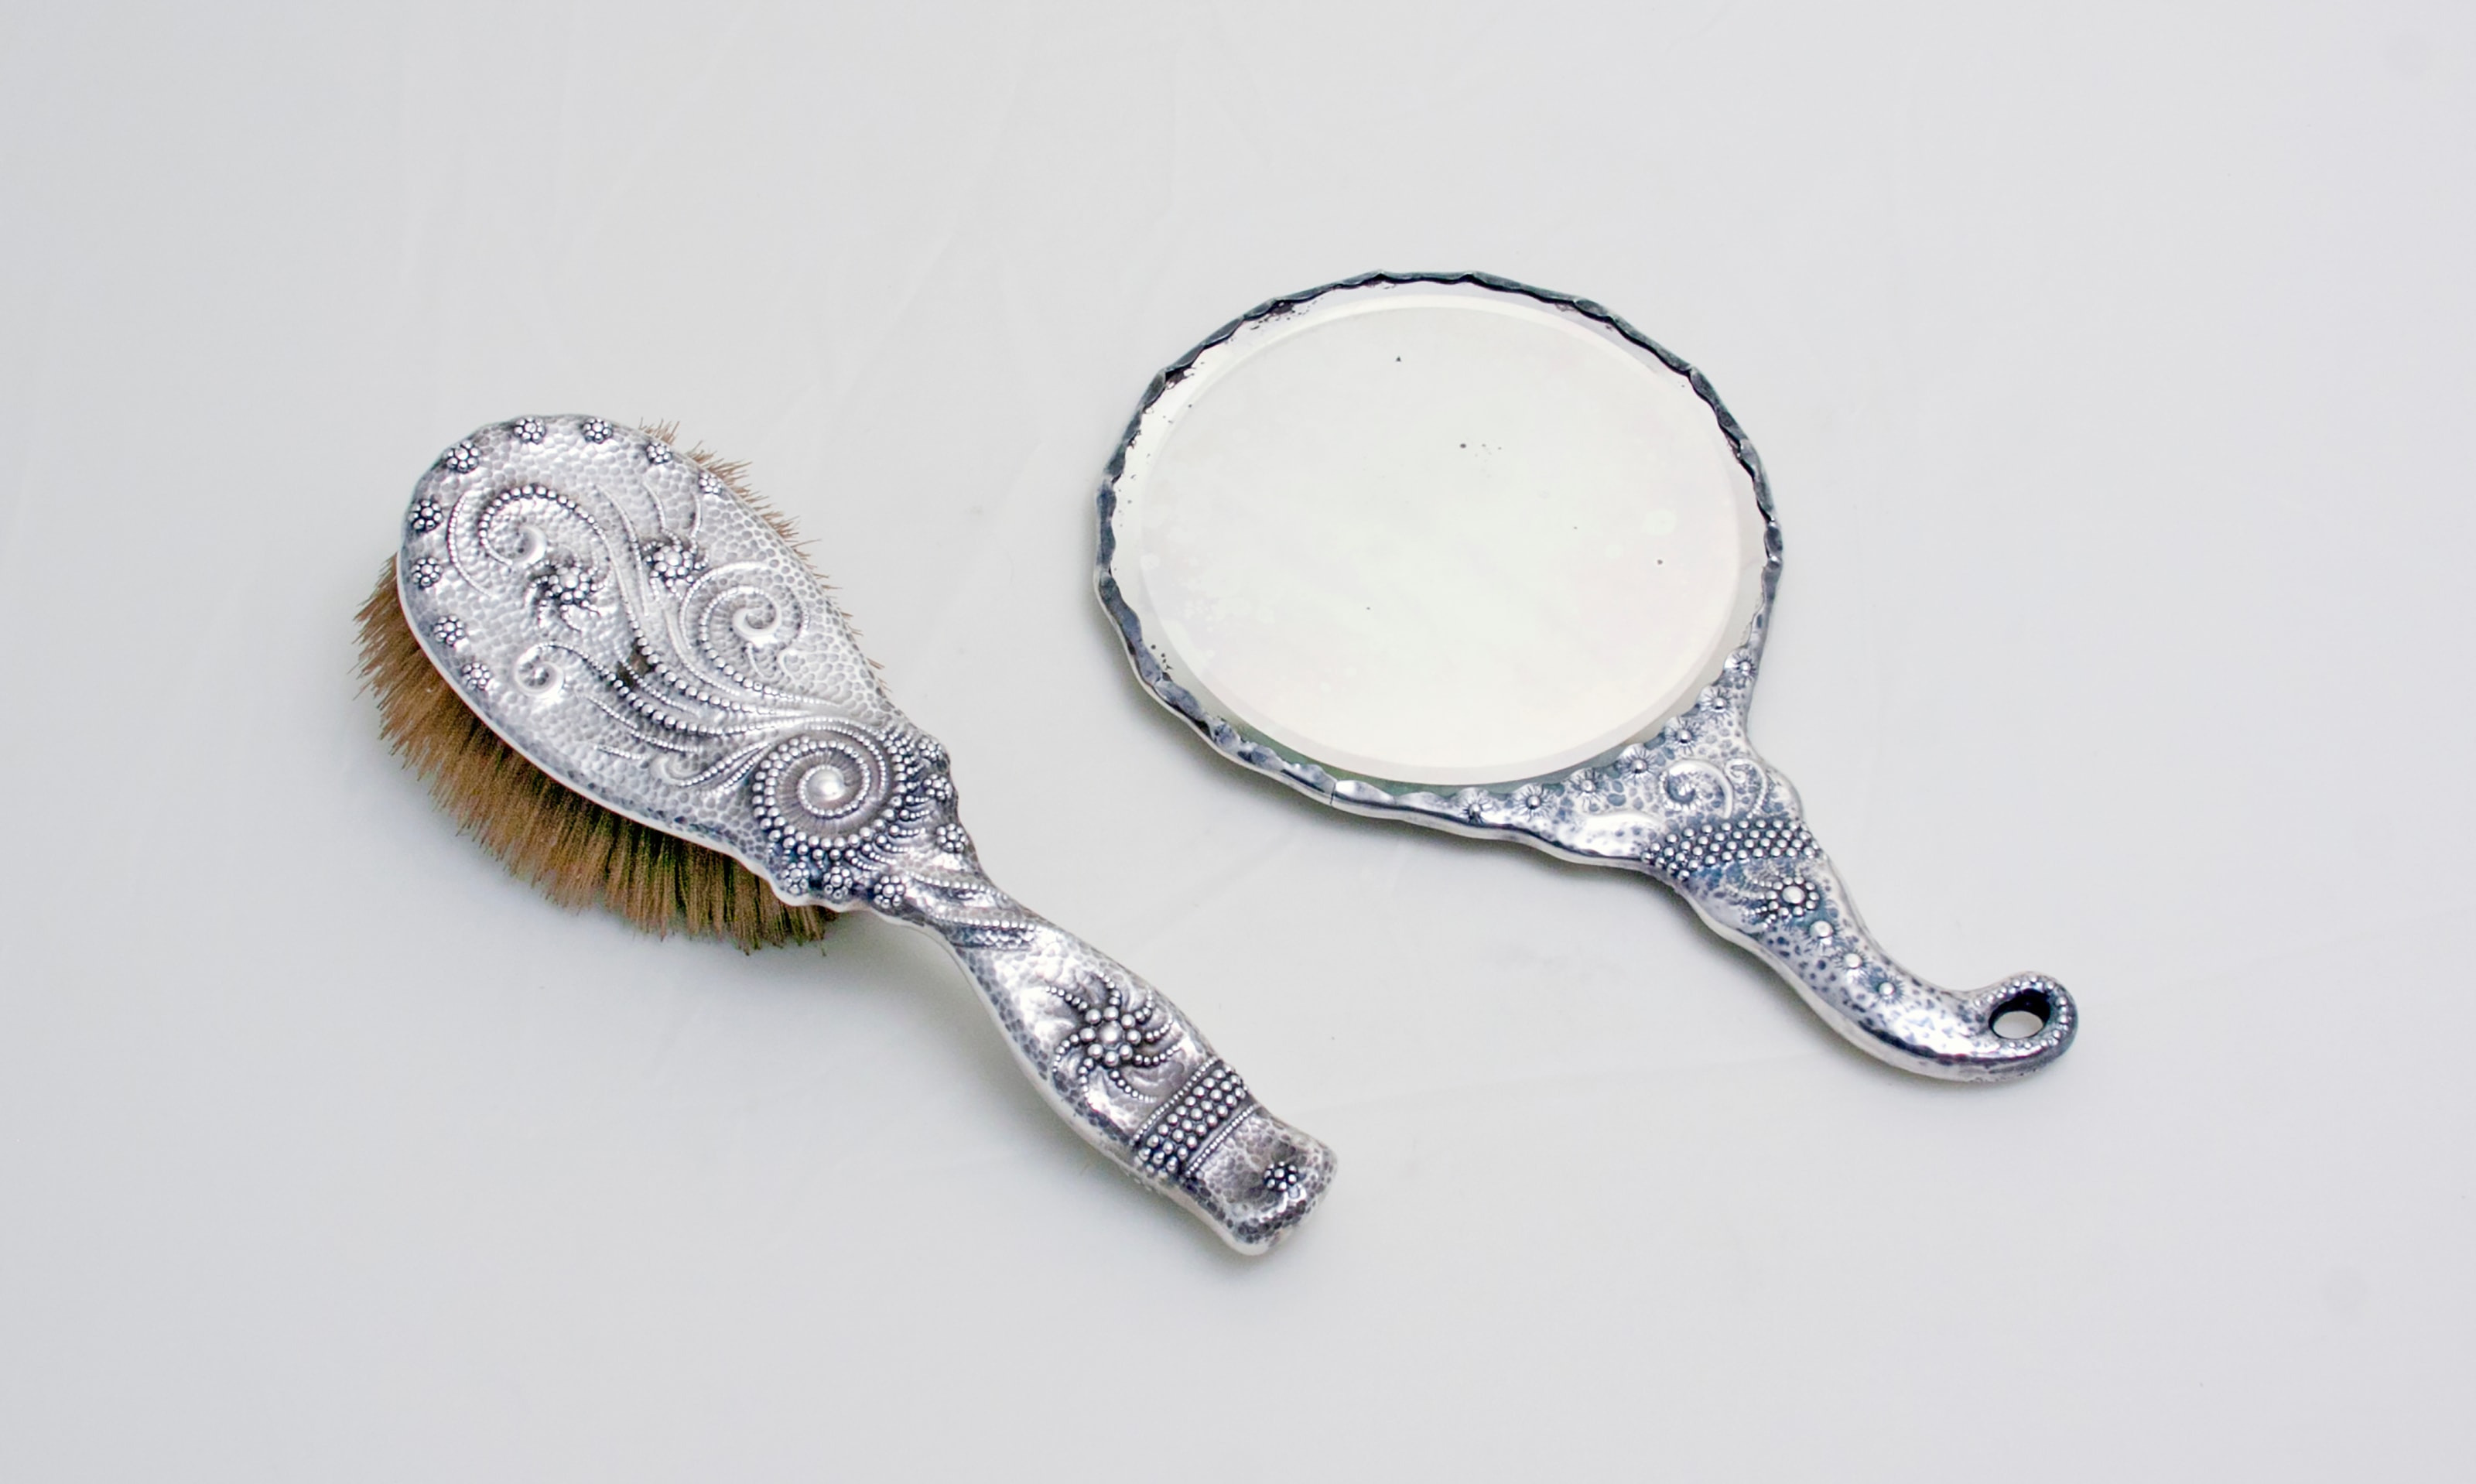 a sterling silver mirror and hairbrush, &quot;vanity set&quot;, in unusual pearled technique by charles osborne for whiting manufacturing company - typical of the aesthetic movement taste